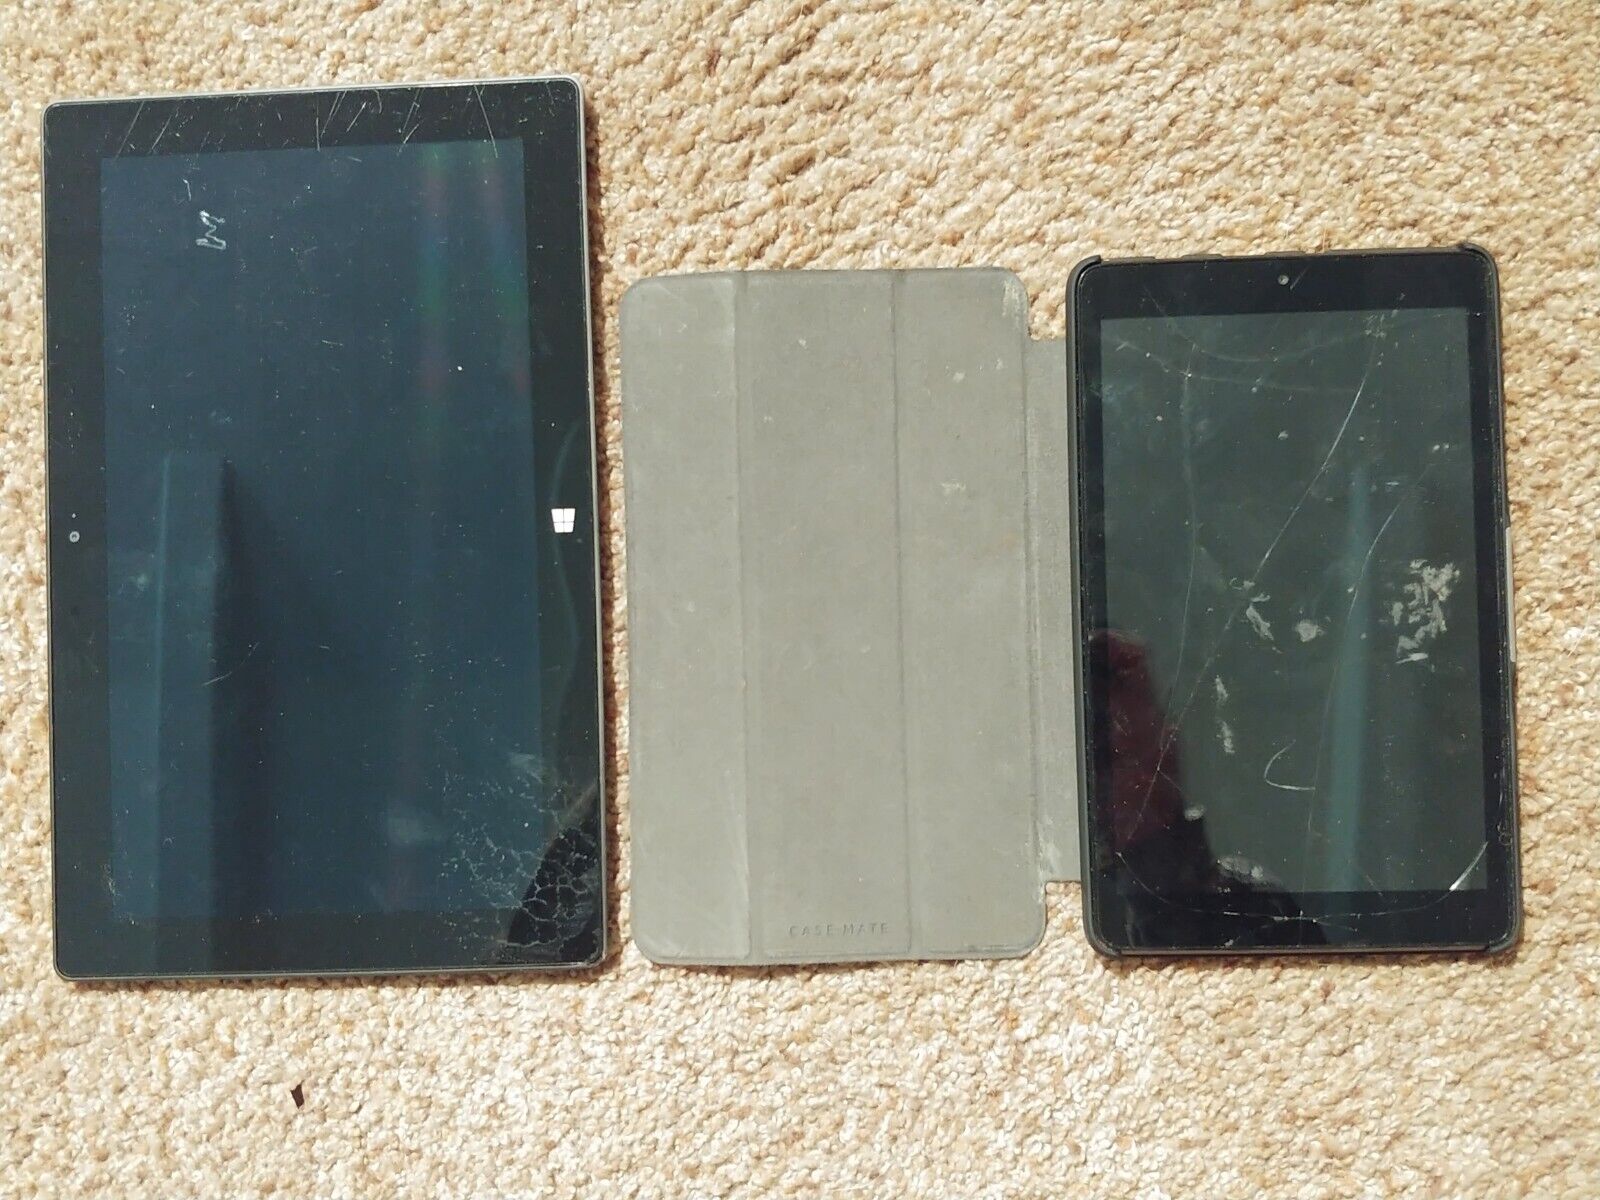 Lot Of Two Tablets - Brand/Model/Working Condition Unknown